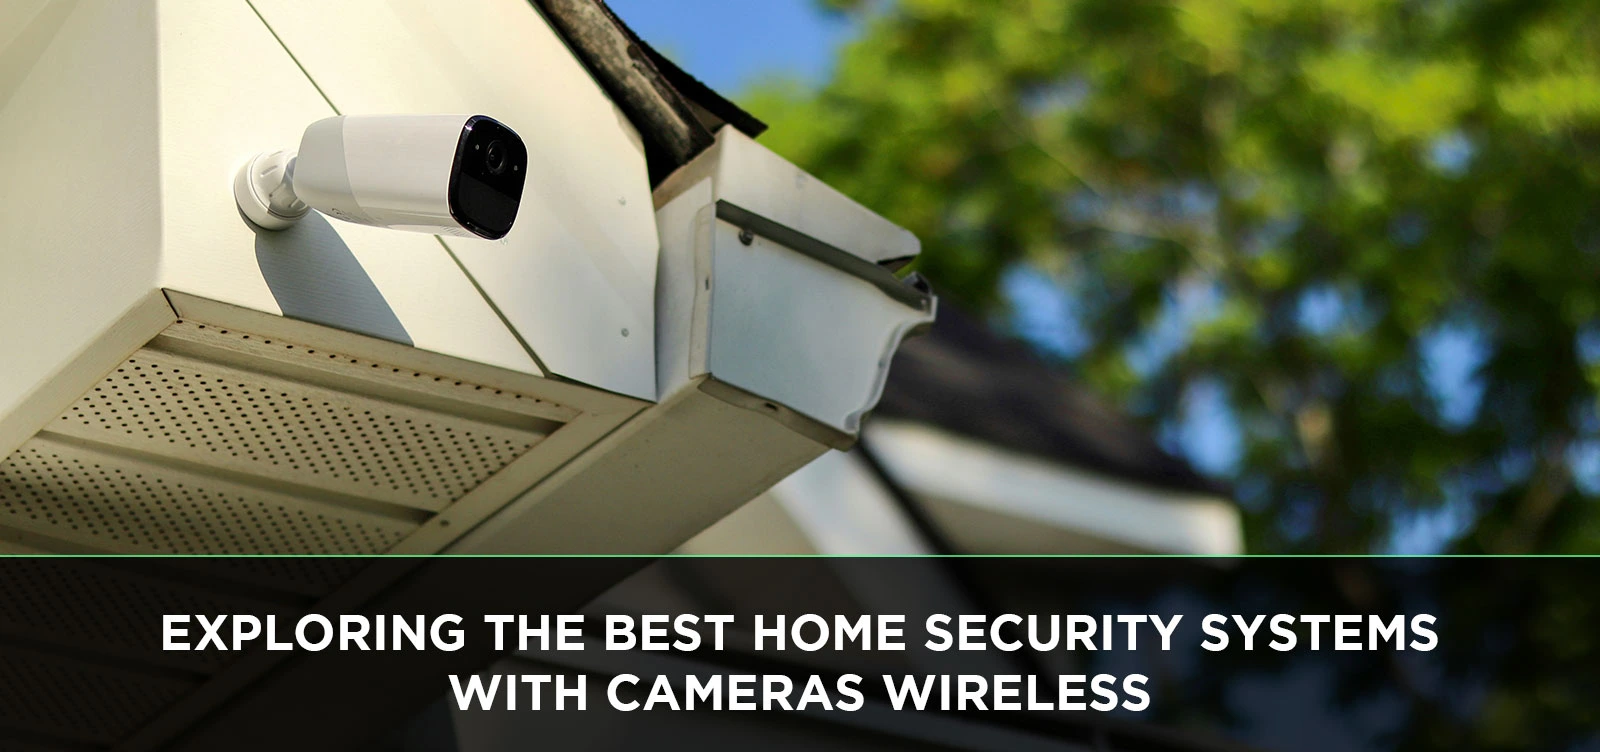 Exploring the Best Home Security Systems with Cameras Wireless